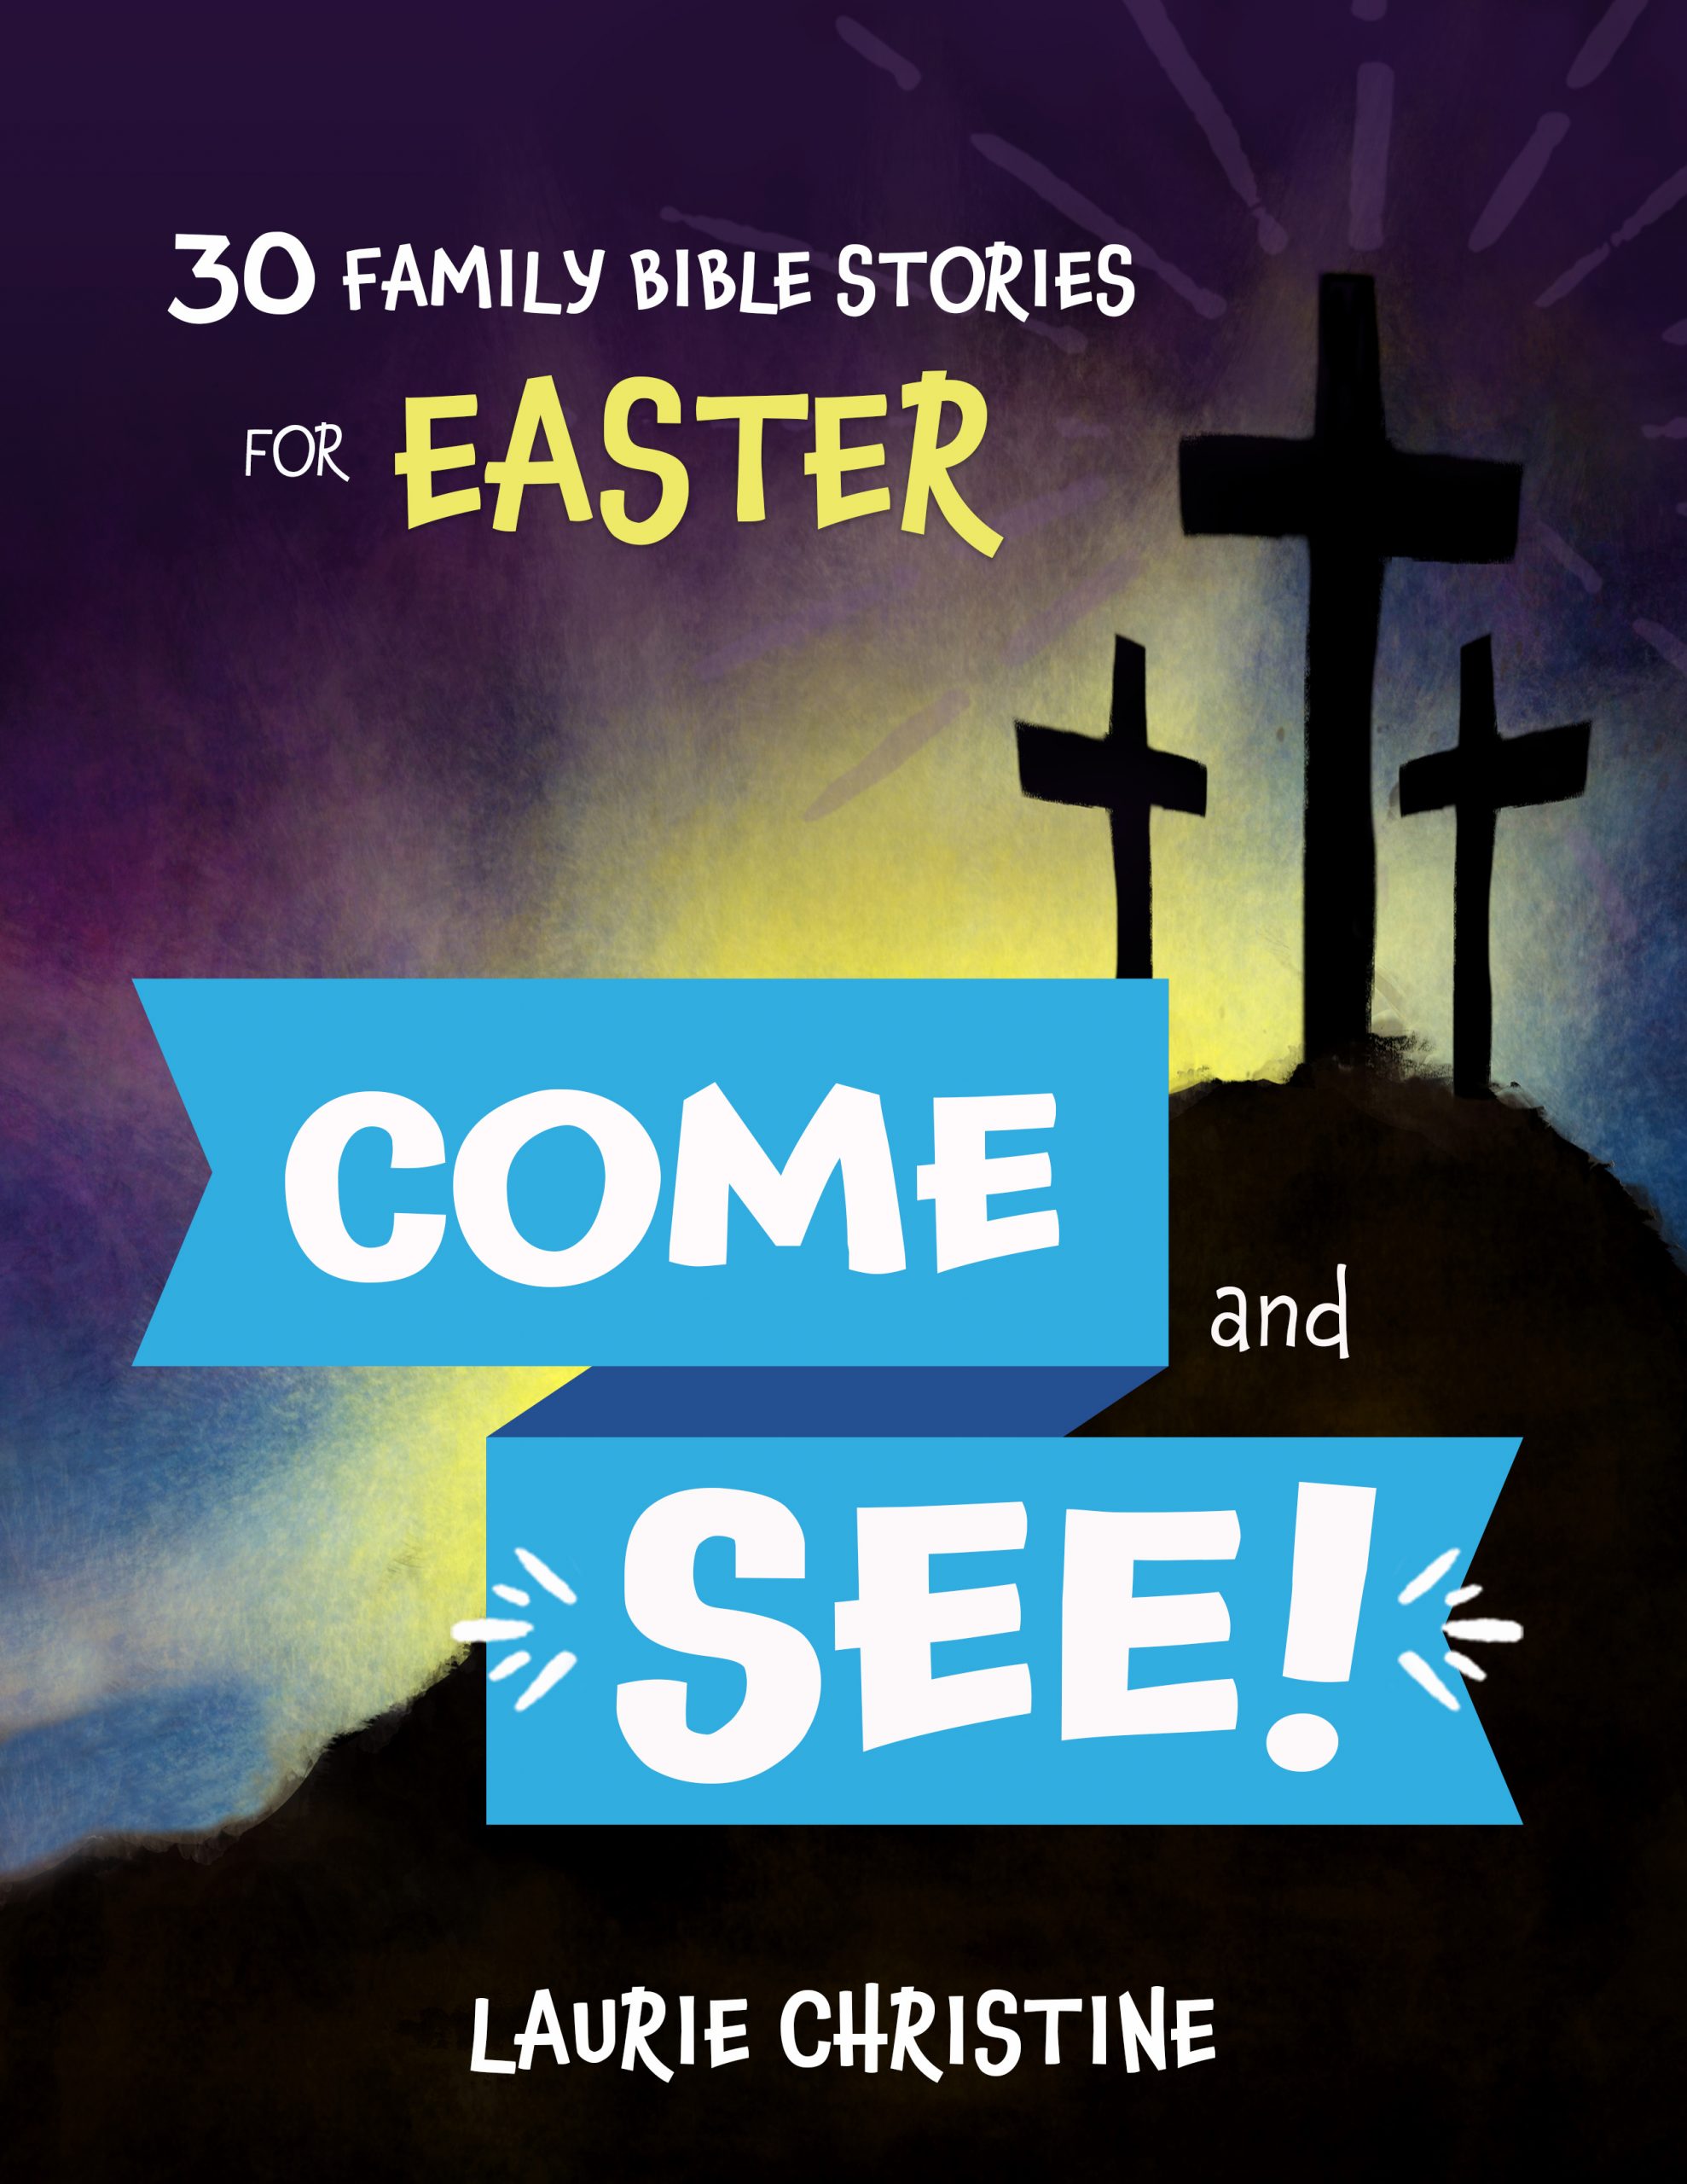 Laurie Christine, easter devotional, family devotions, bible story, read-aloud, Easter